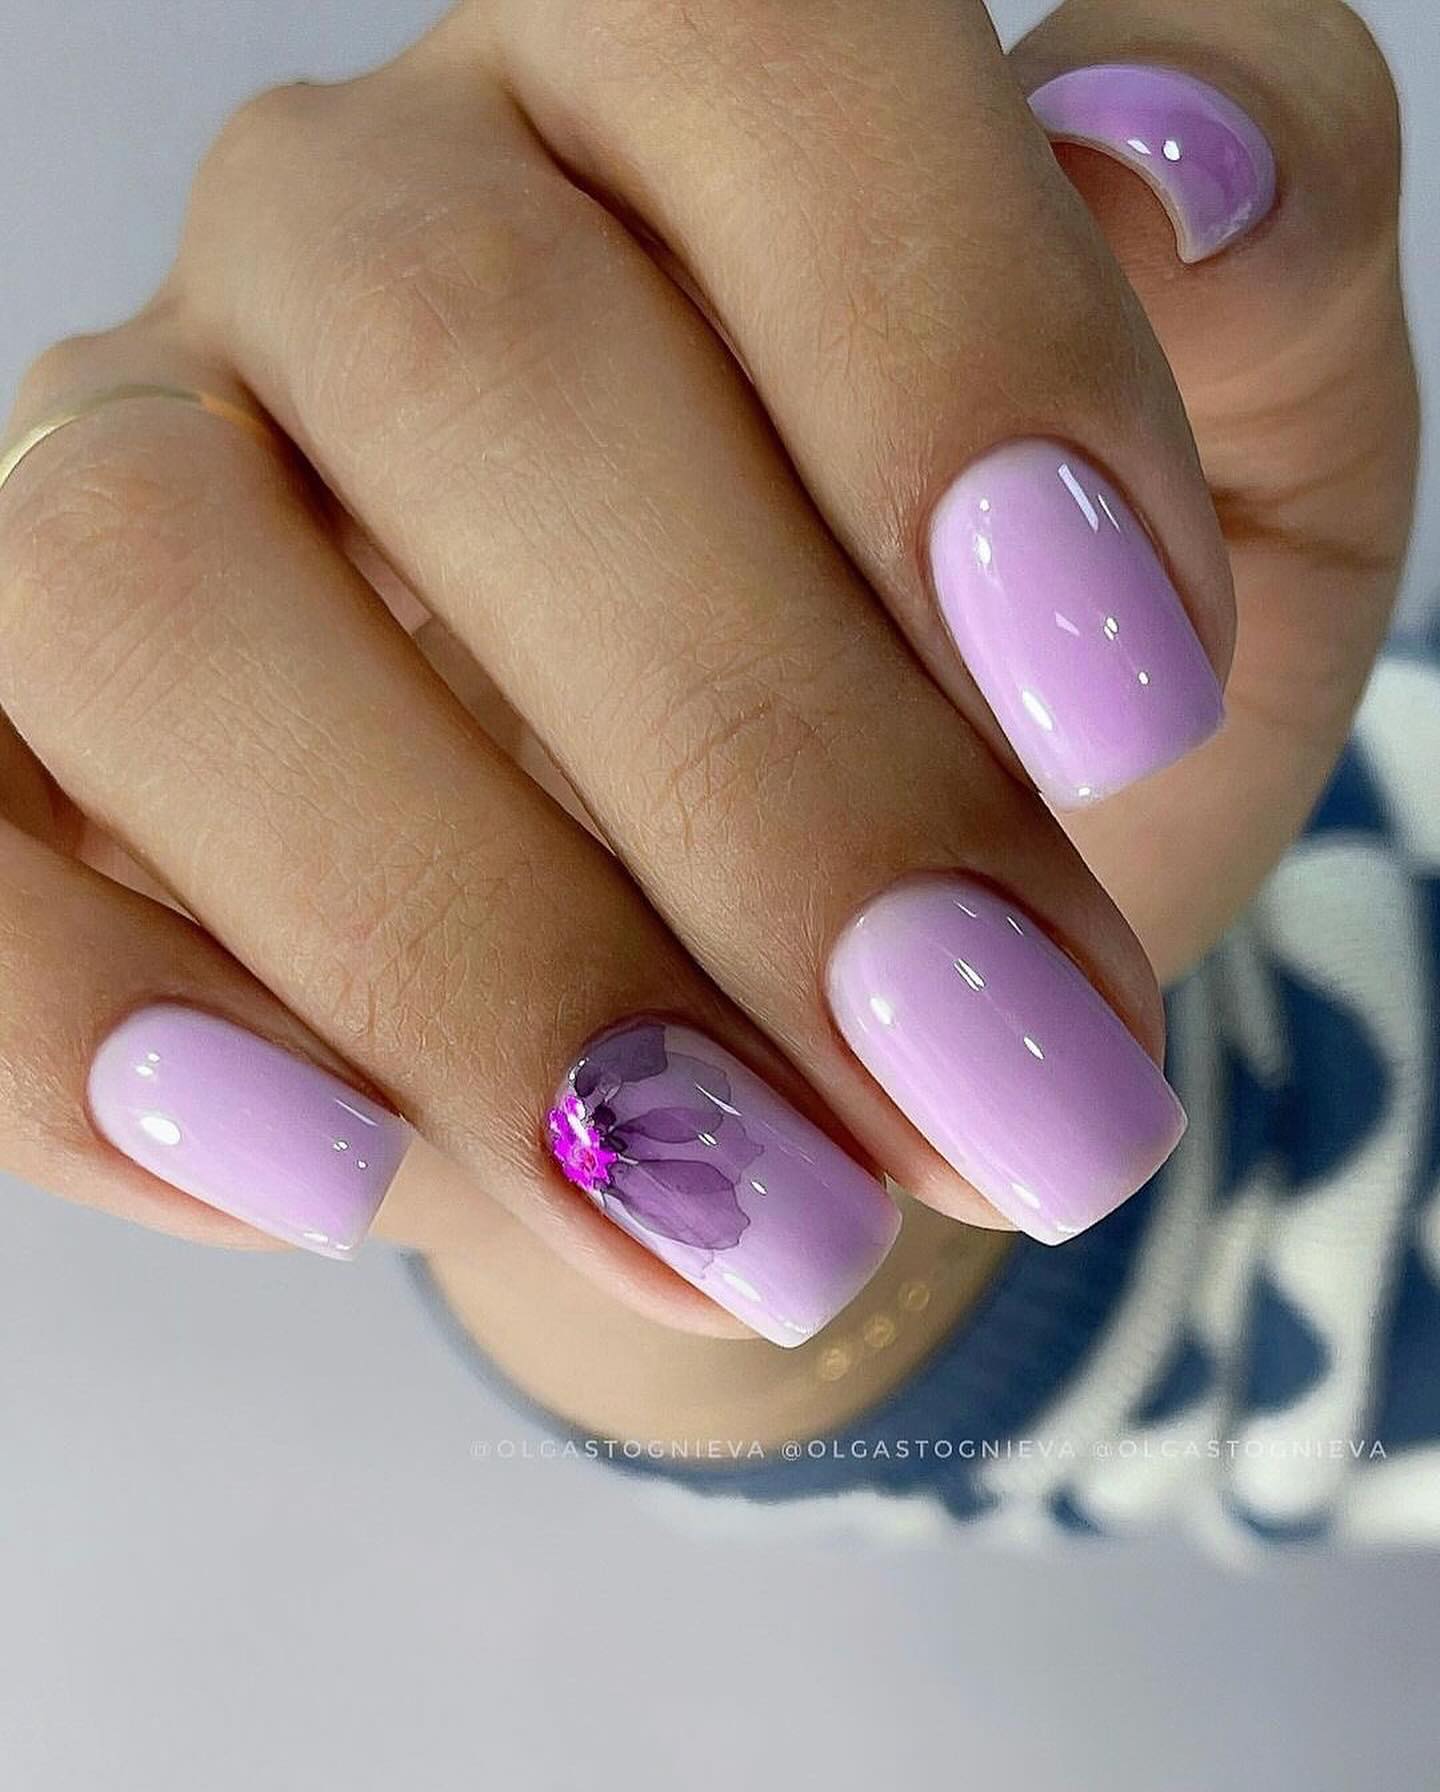 100+ Best Winter Nail Ideas And Designs To Try images 52